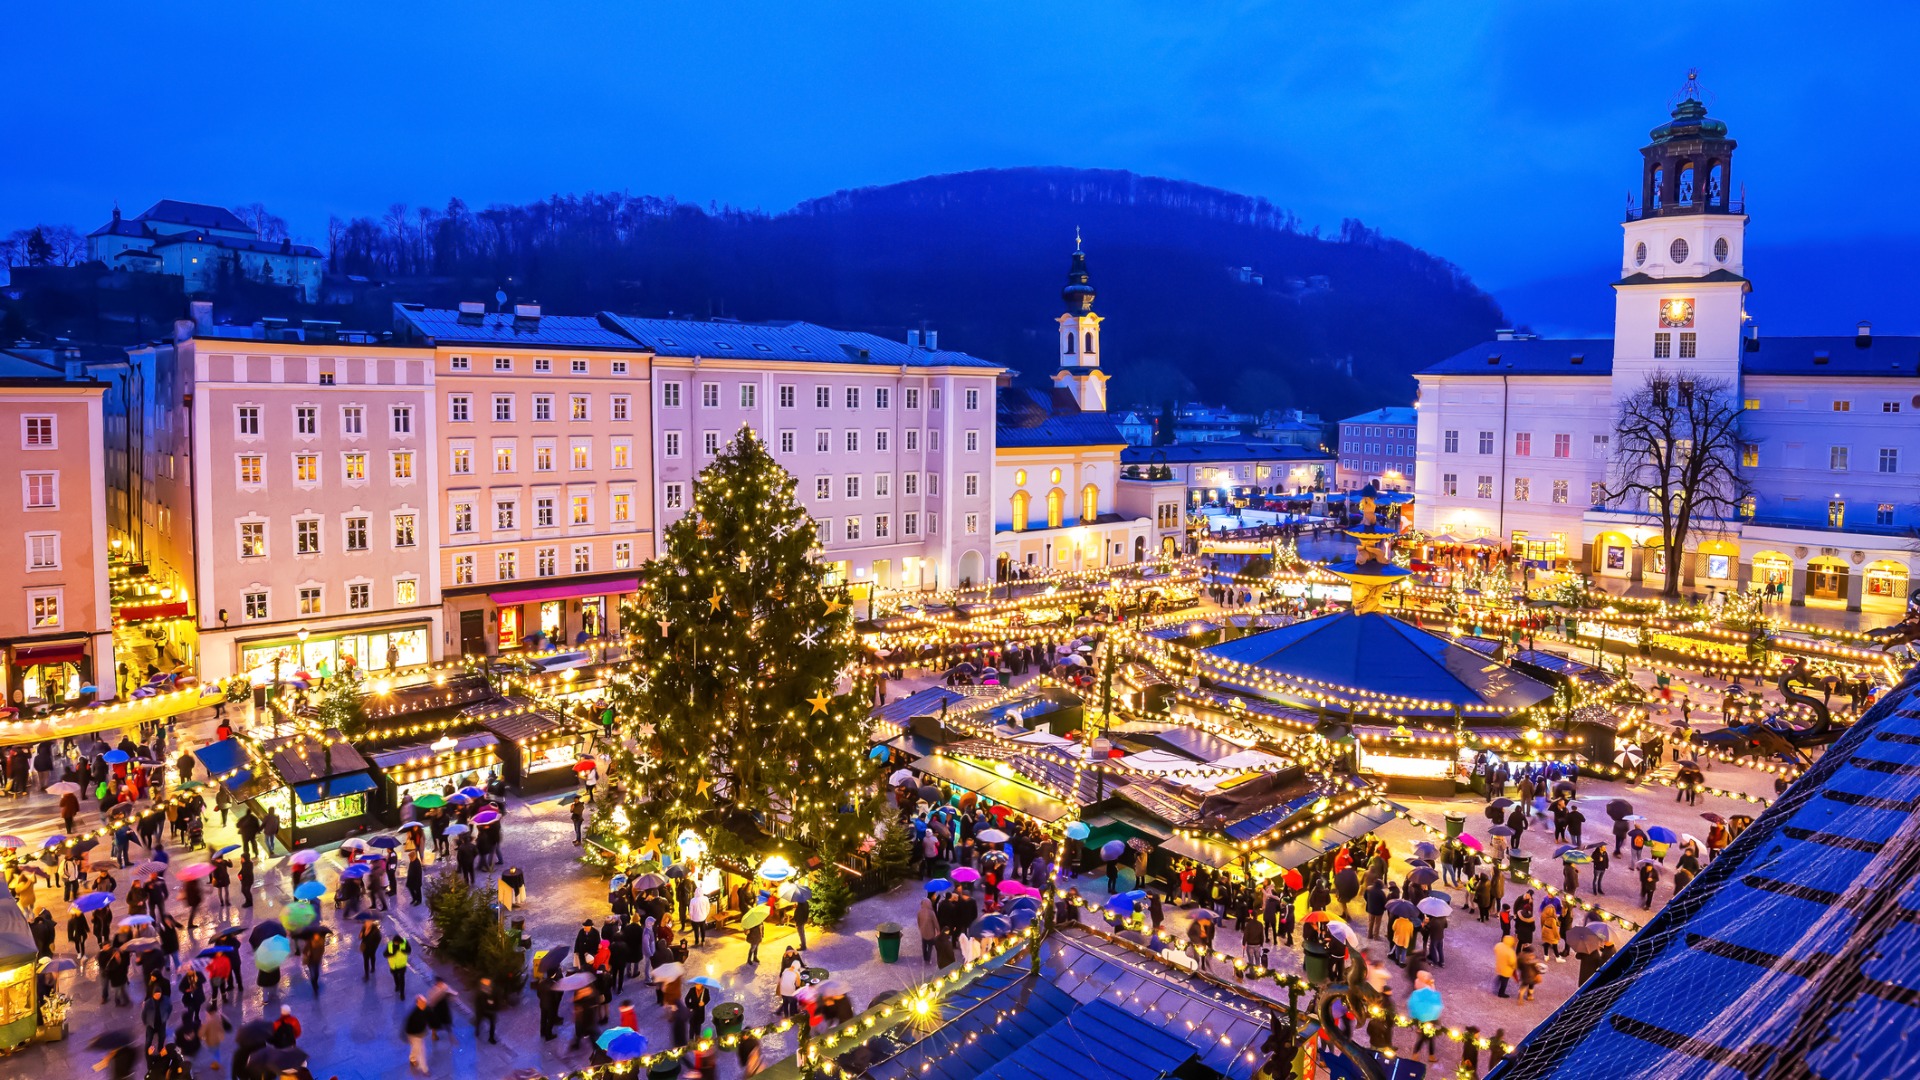 This image shows a panoramic view of Salzburg Christmas Market at dusk. Surrounded by beautiful buildings, the square is filled with stalls and festive lights. There is a Christmas tree in the middle of the square and many people. 